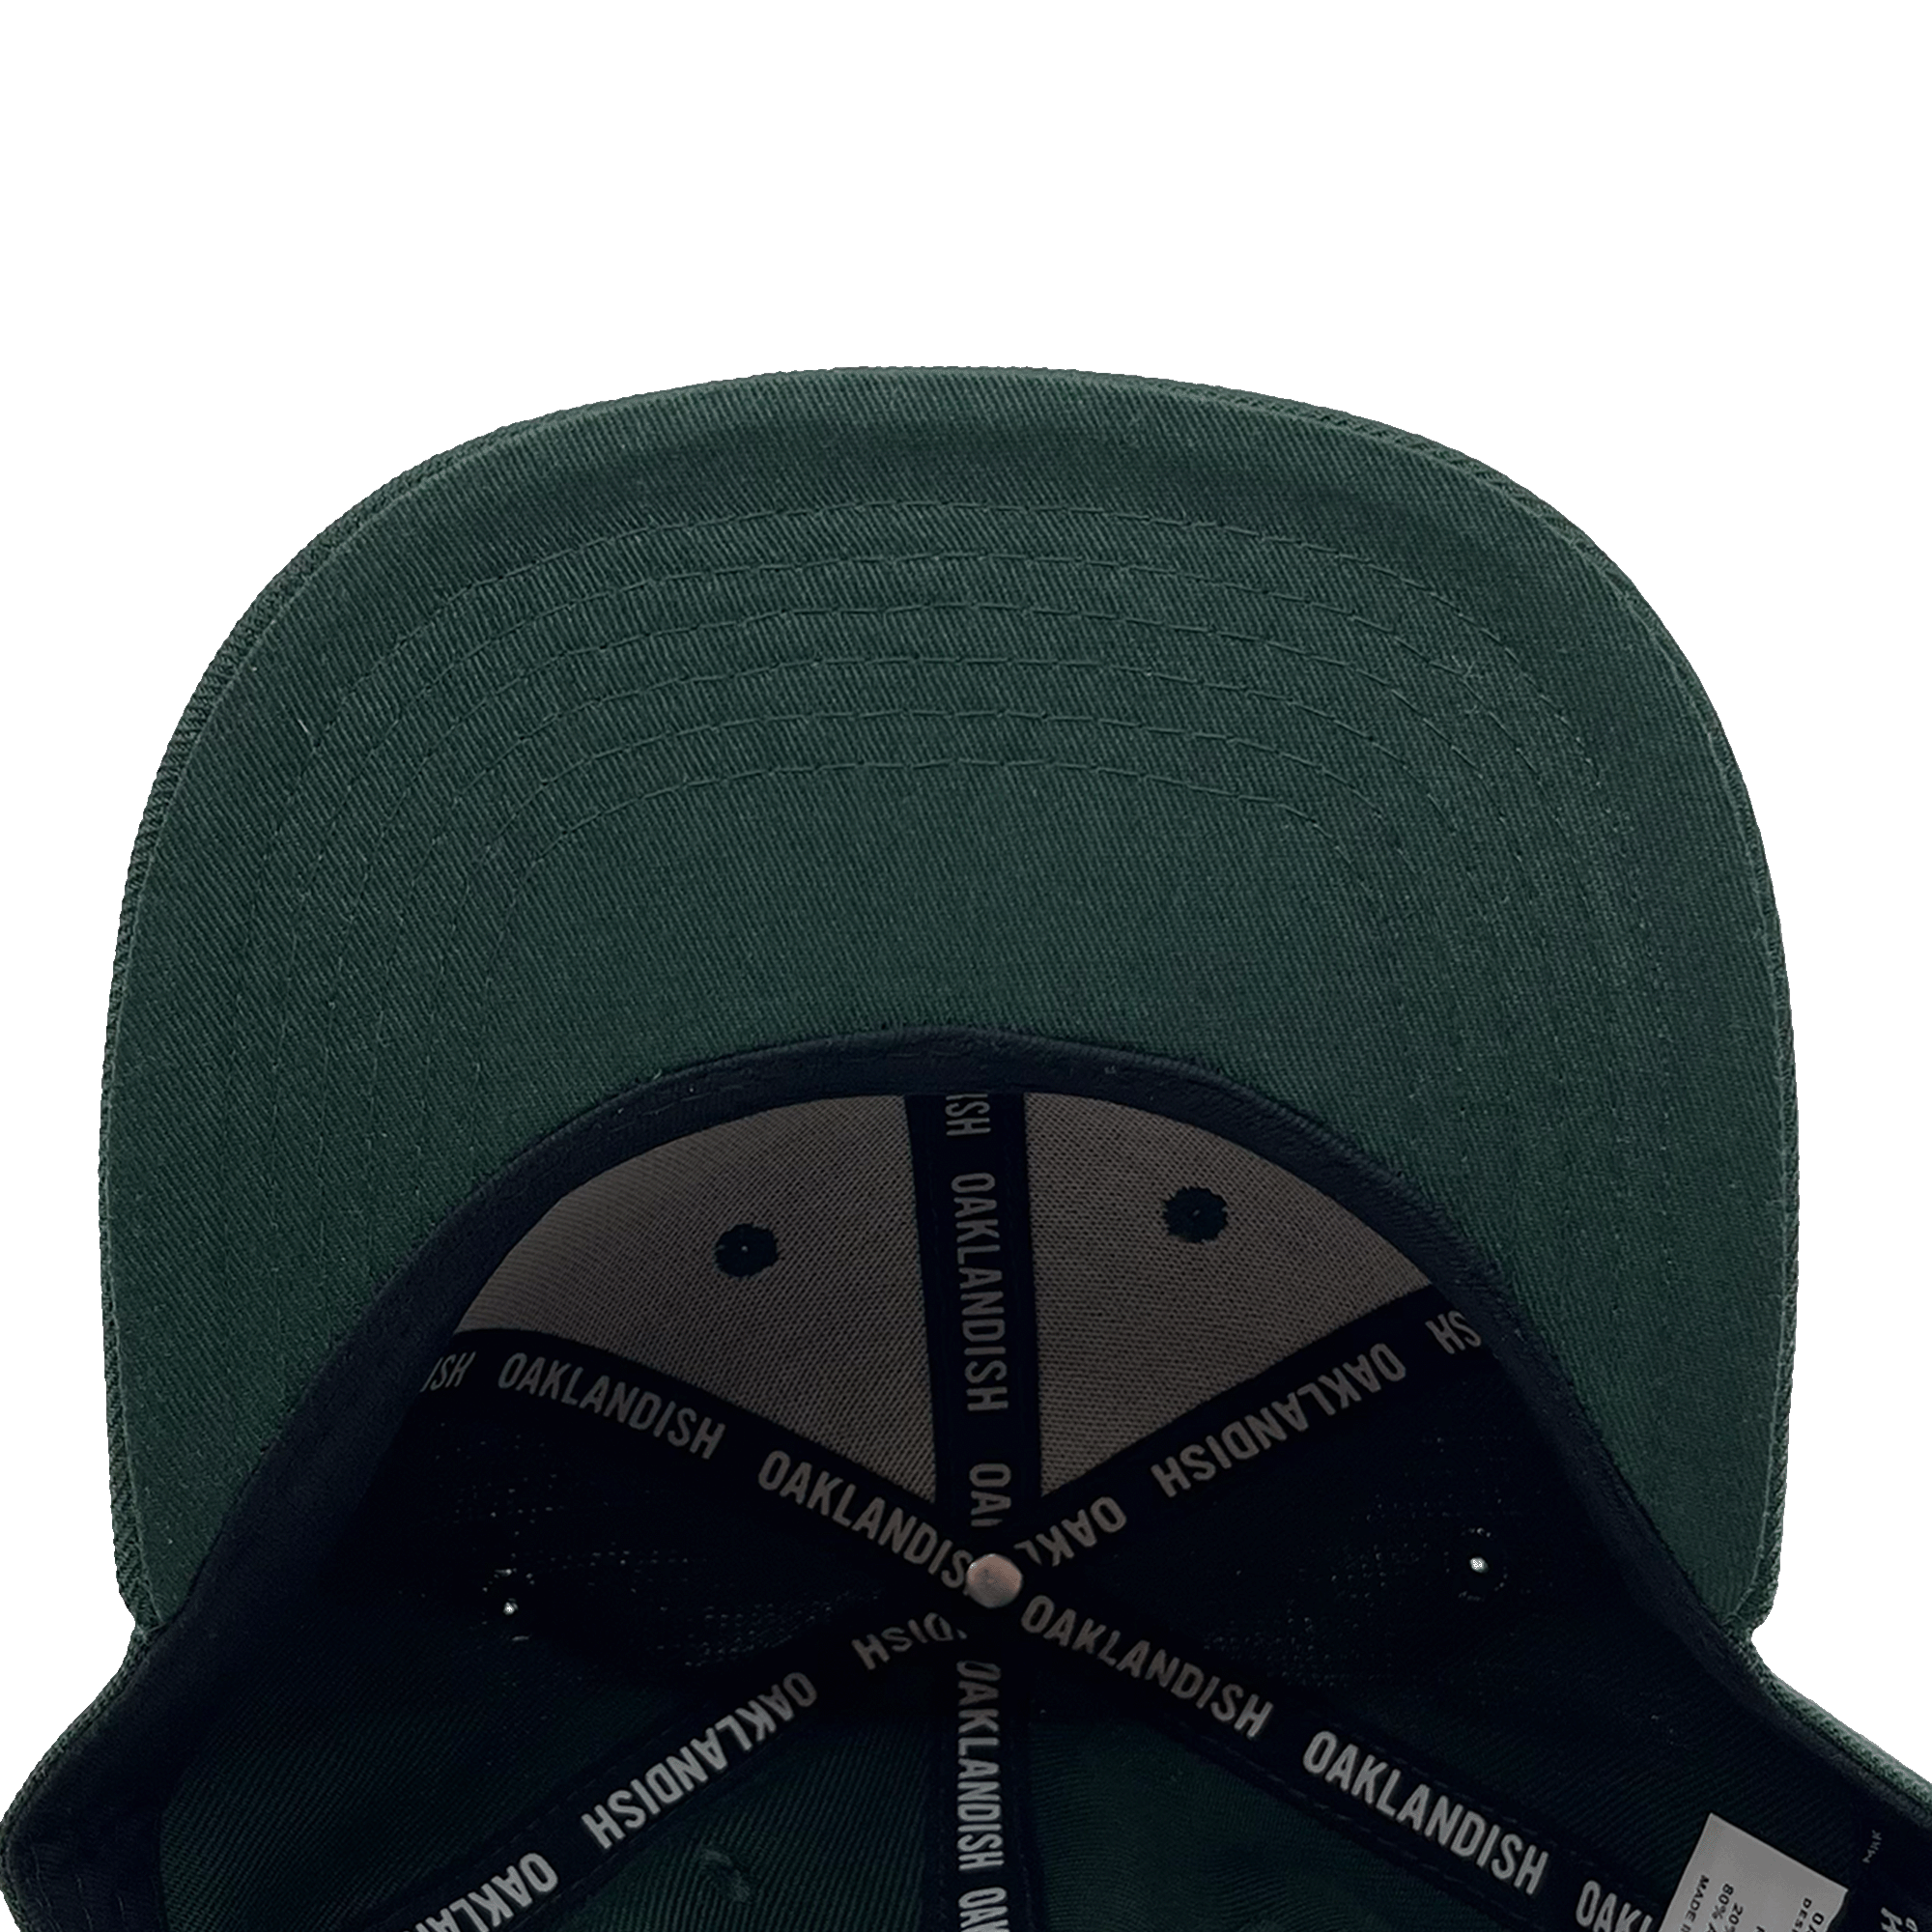 View of the underside of the green bill of a green cap with black striping and Oaklandish wordmark on repeat inside the crown.